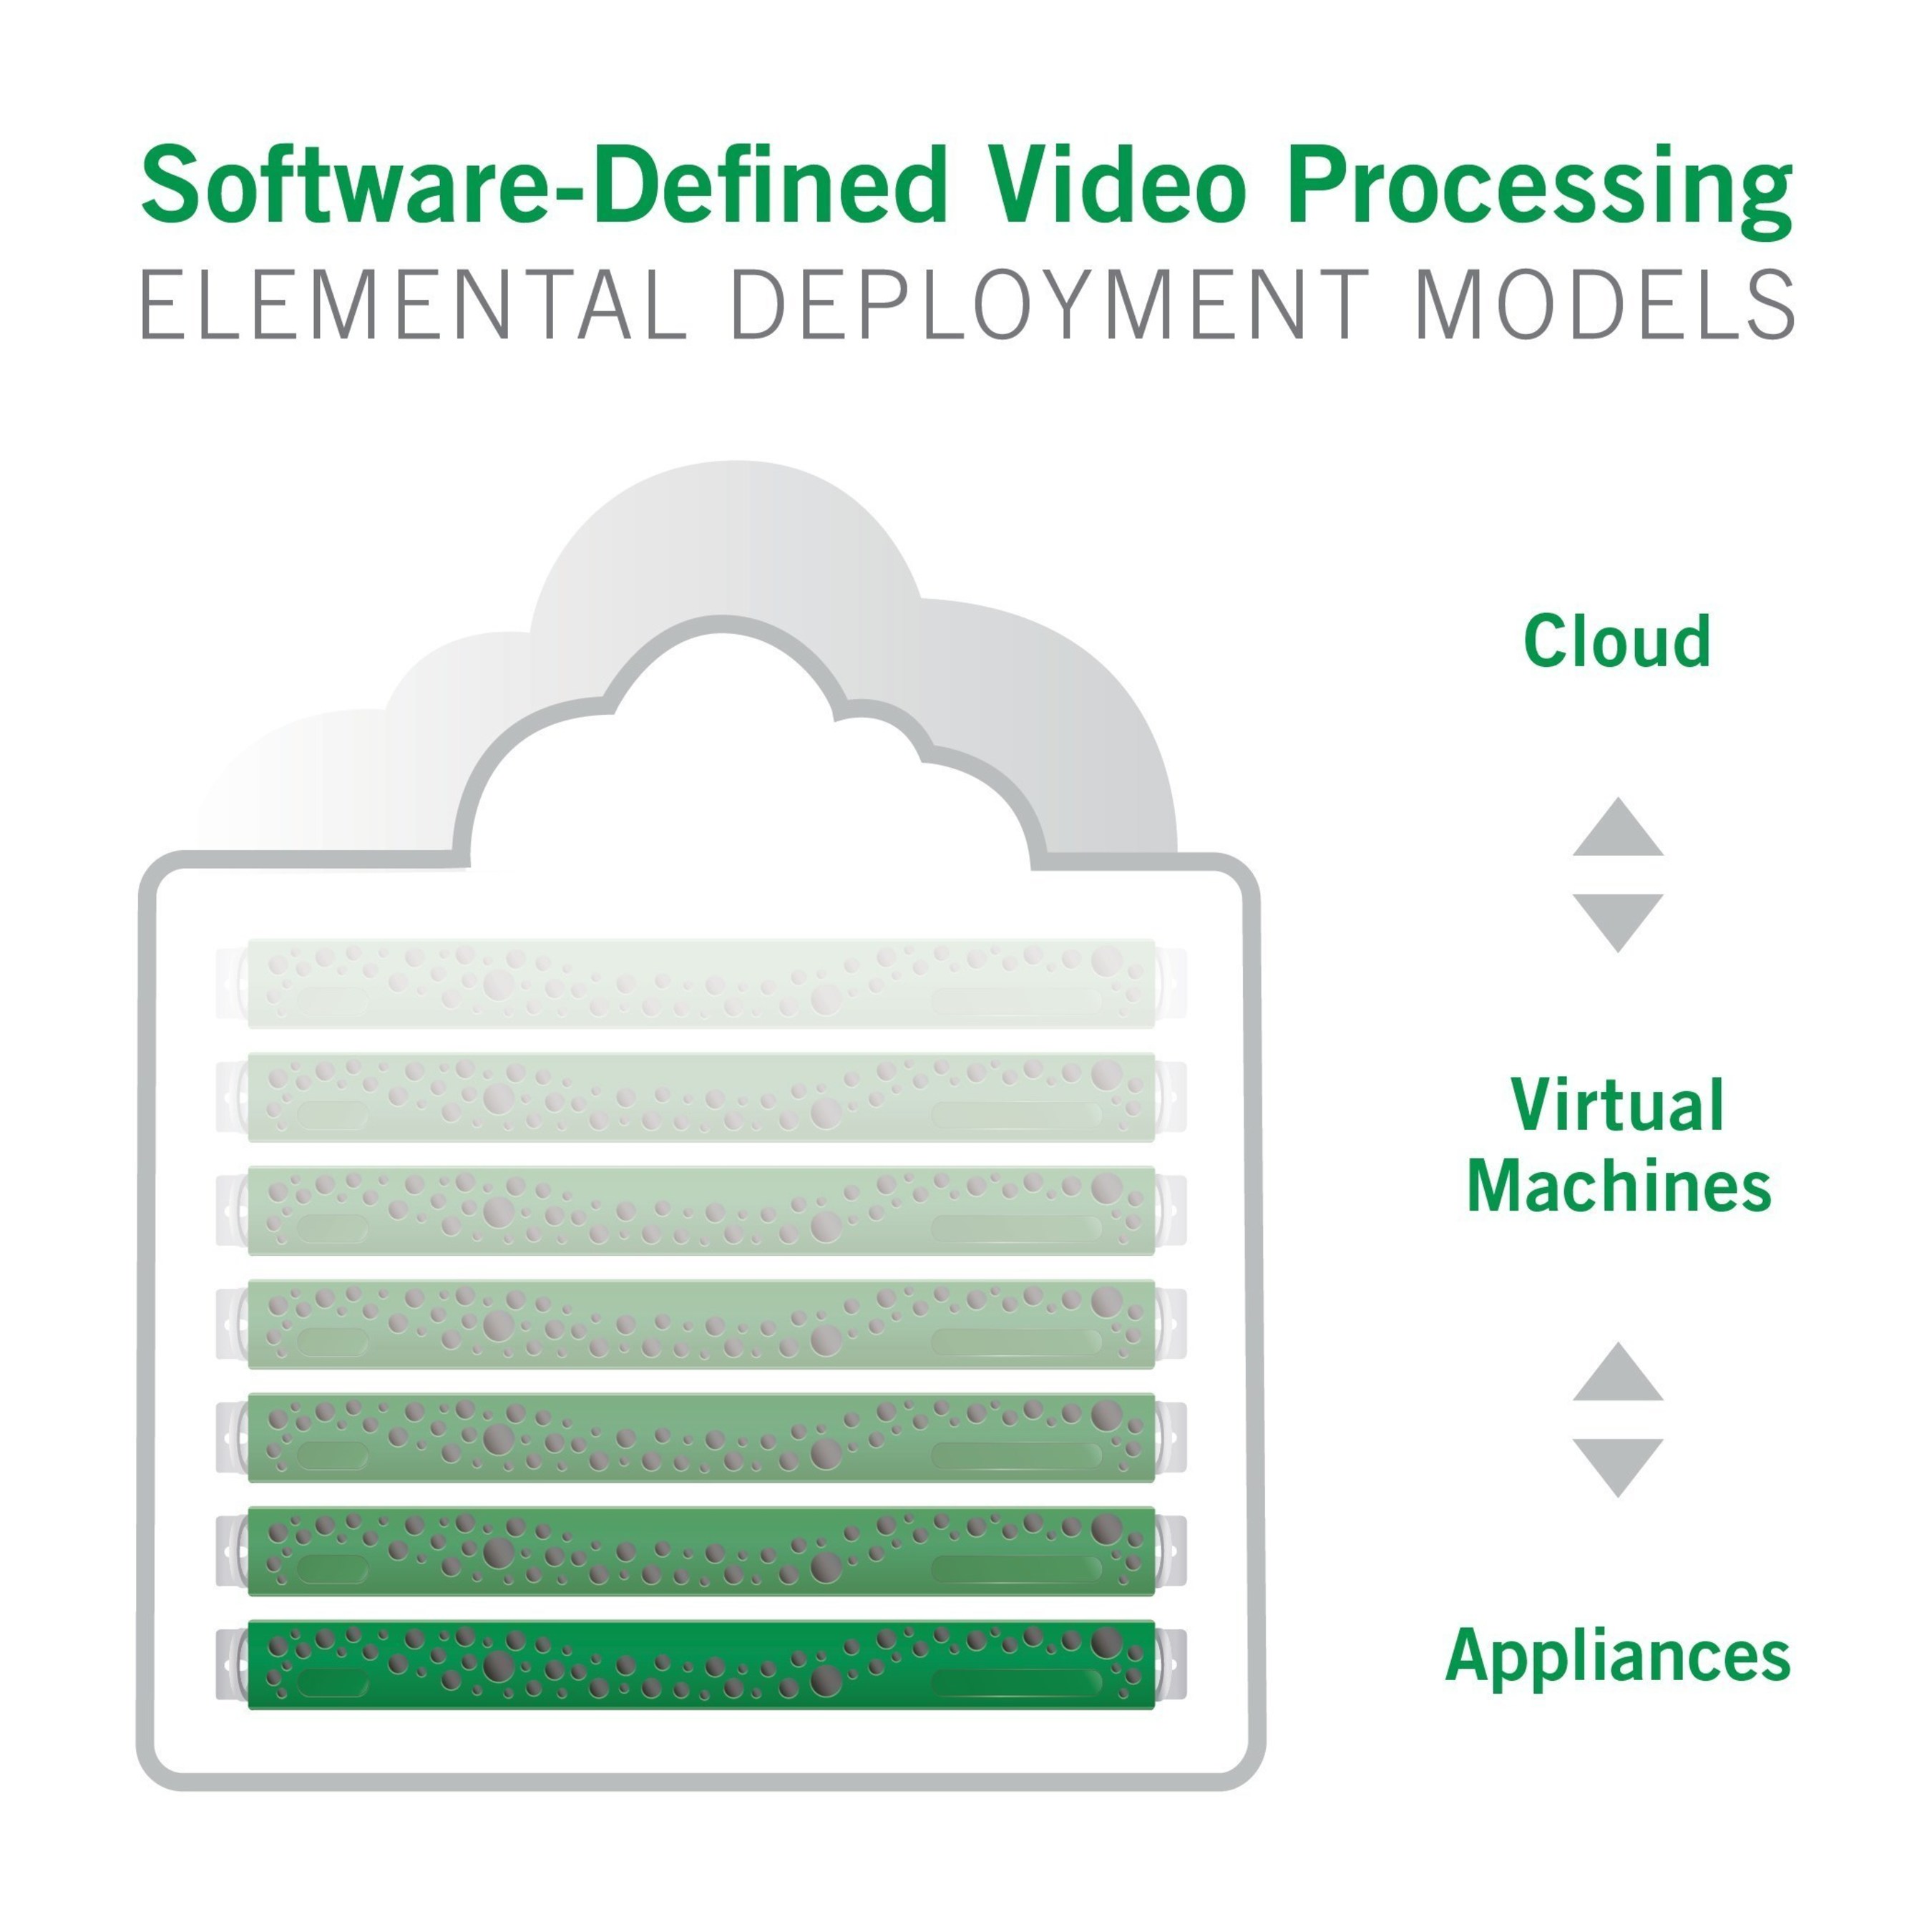 Elemental software-defined video solutions power experiences for more than 600 leading media franchises worldwide.